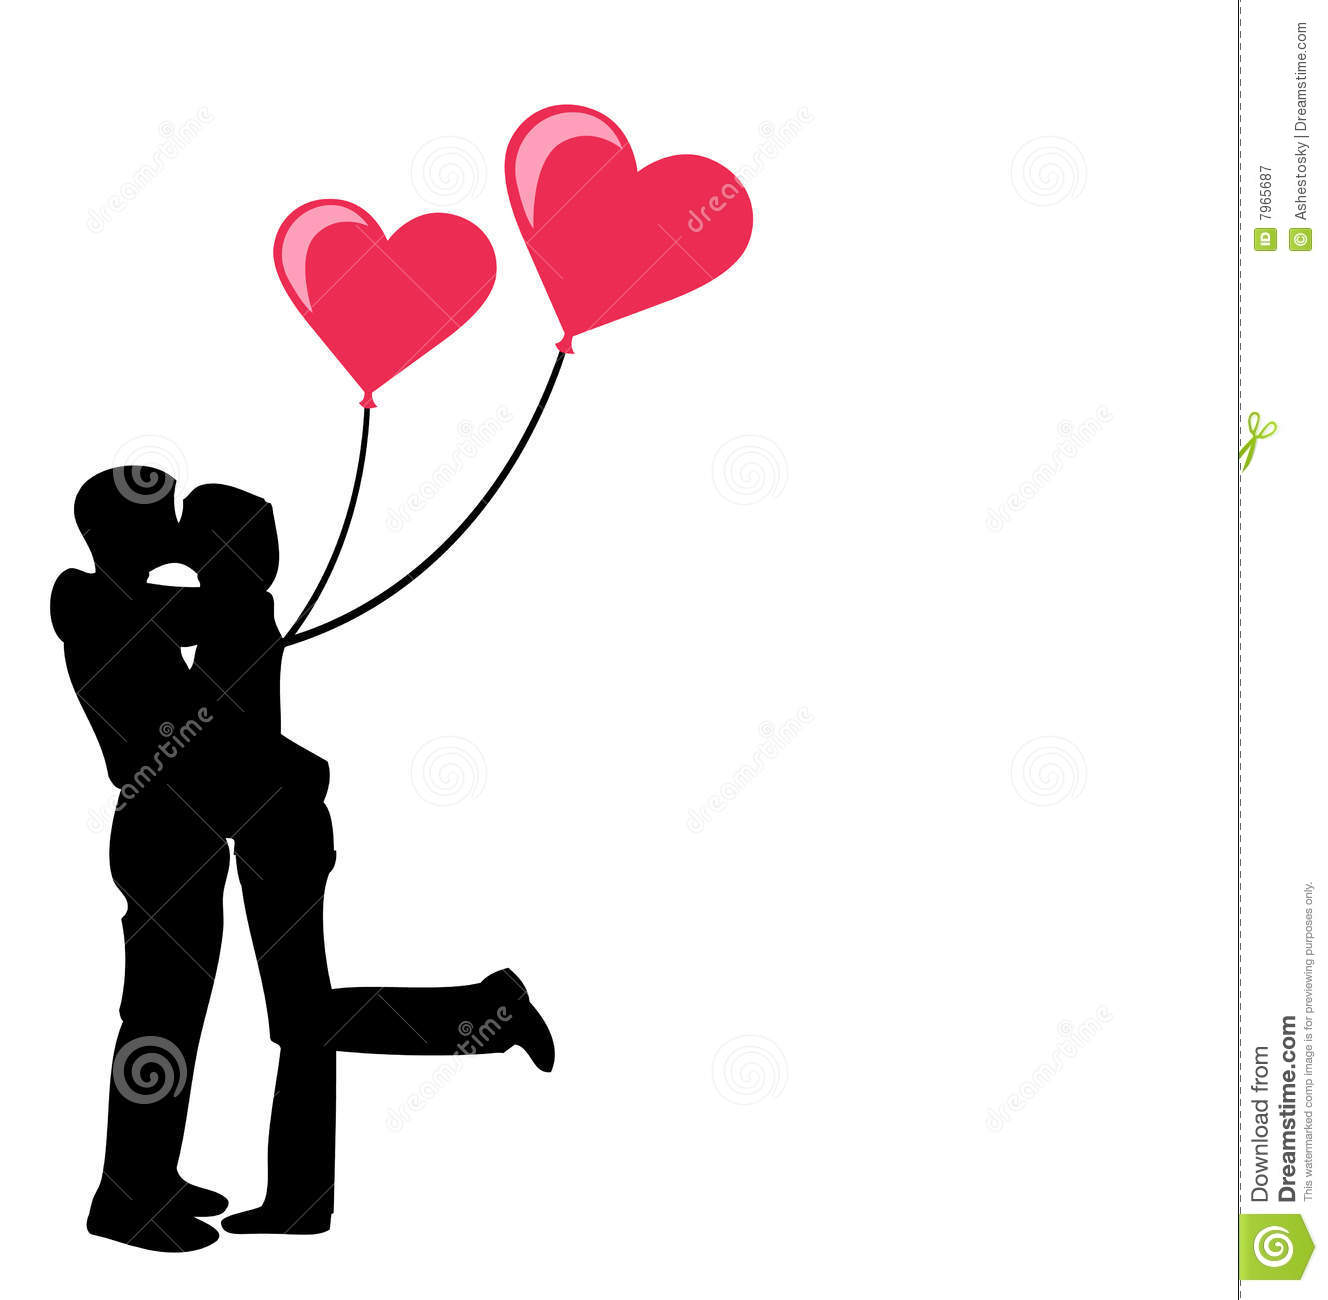 Vector Illustration Of Couple Kissing Each Other With Heart Shaped